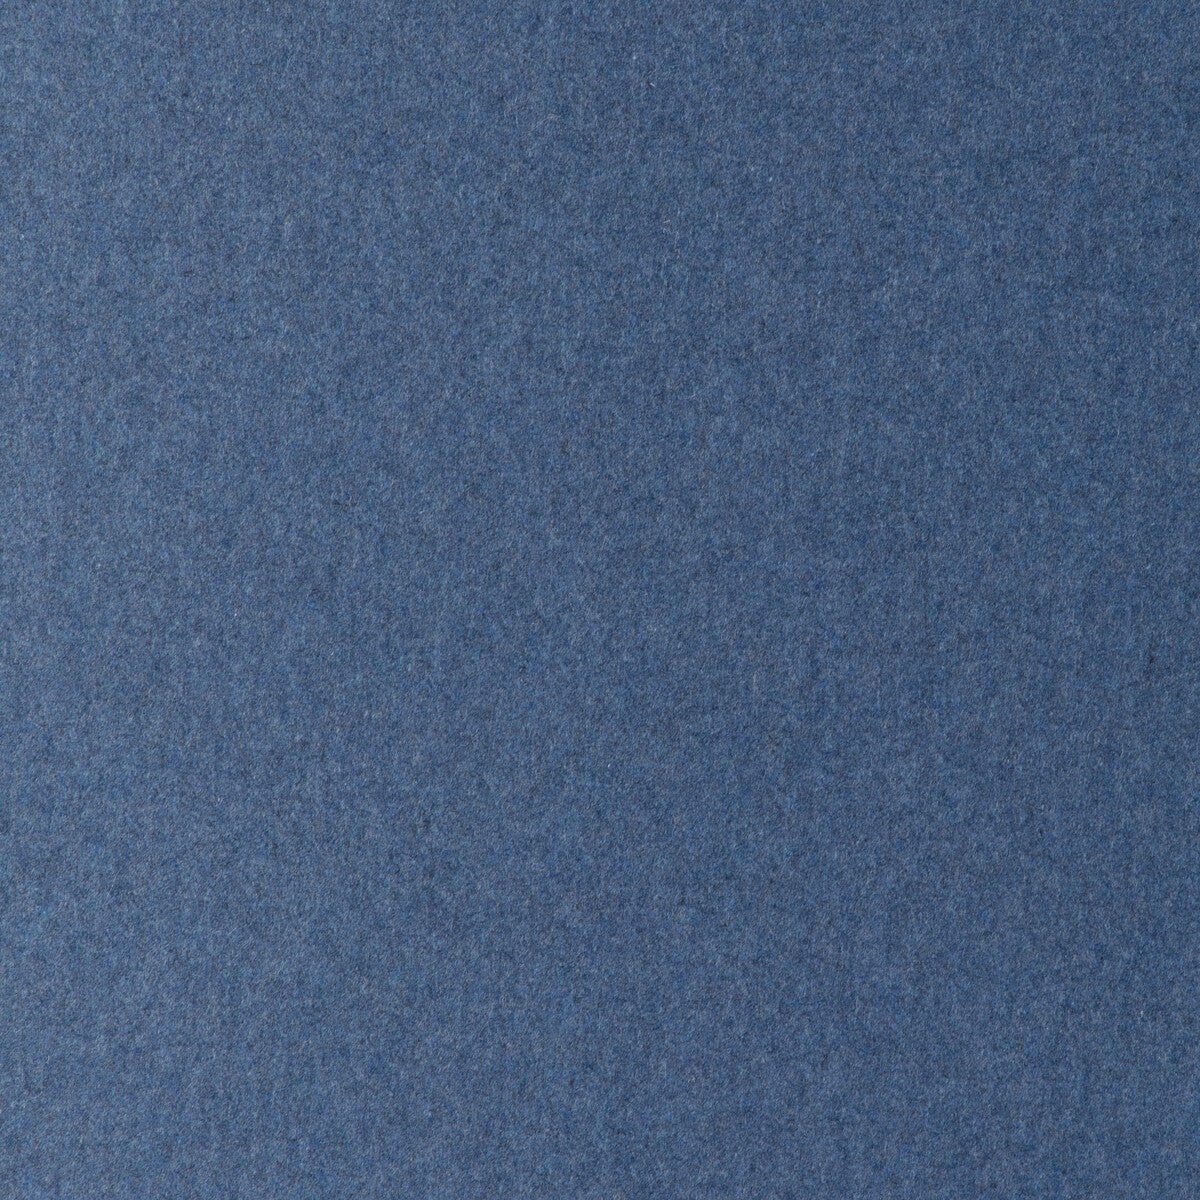 Jefferson Wool fabric in lapis color - pattern 34397.505.0 - by Kravet Contract